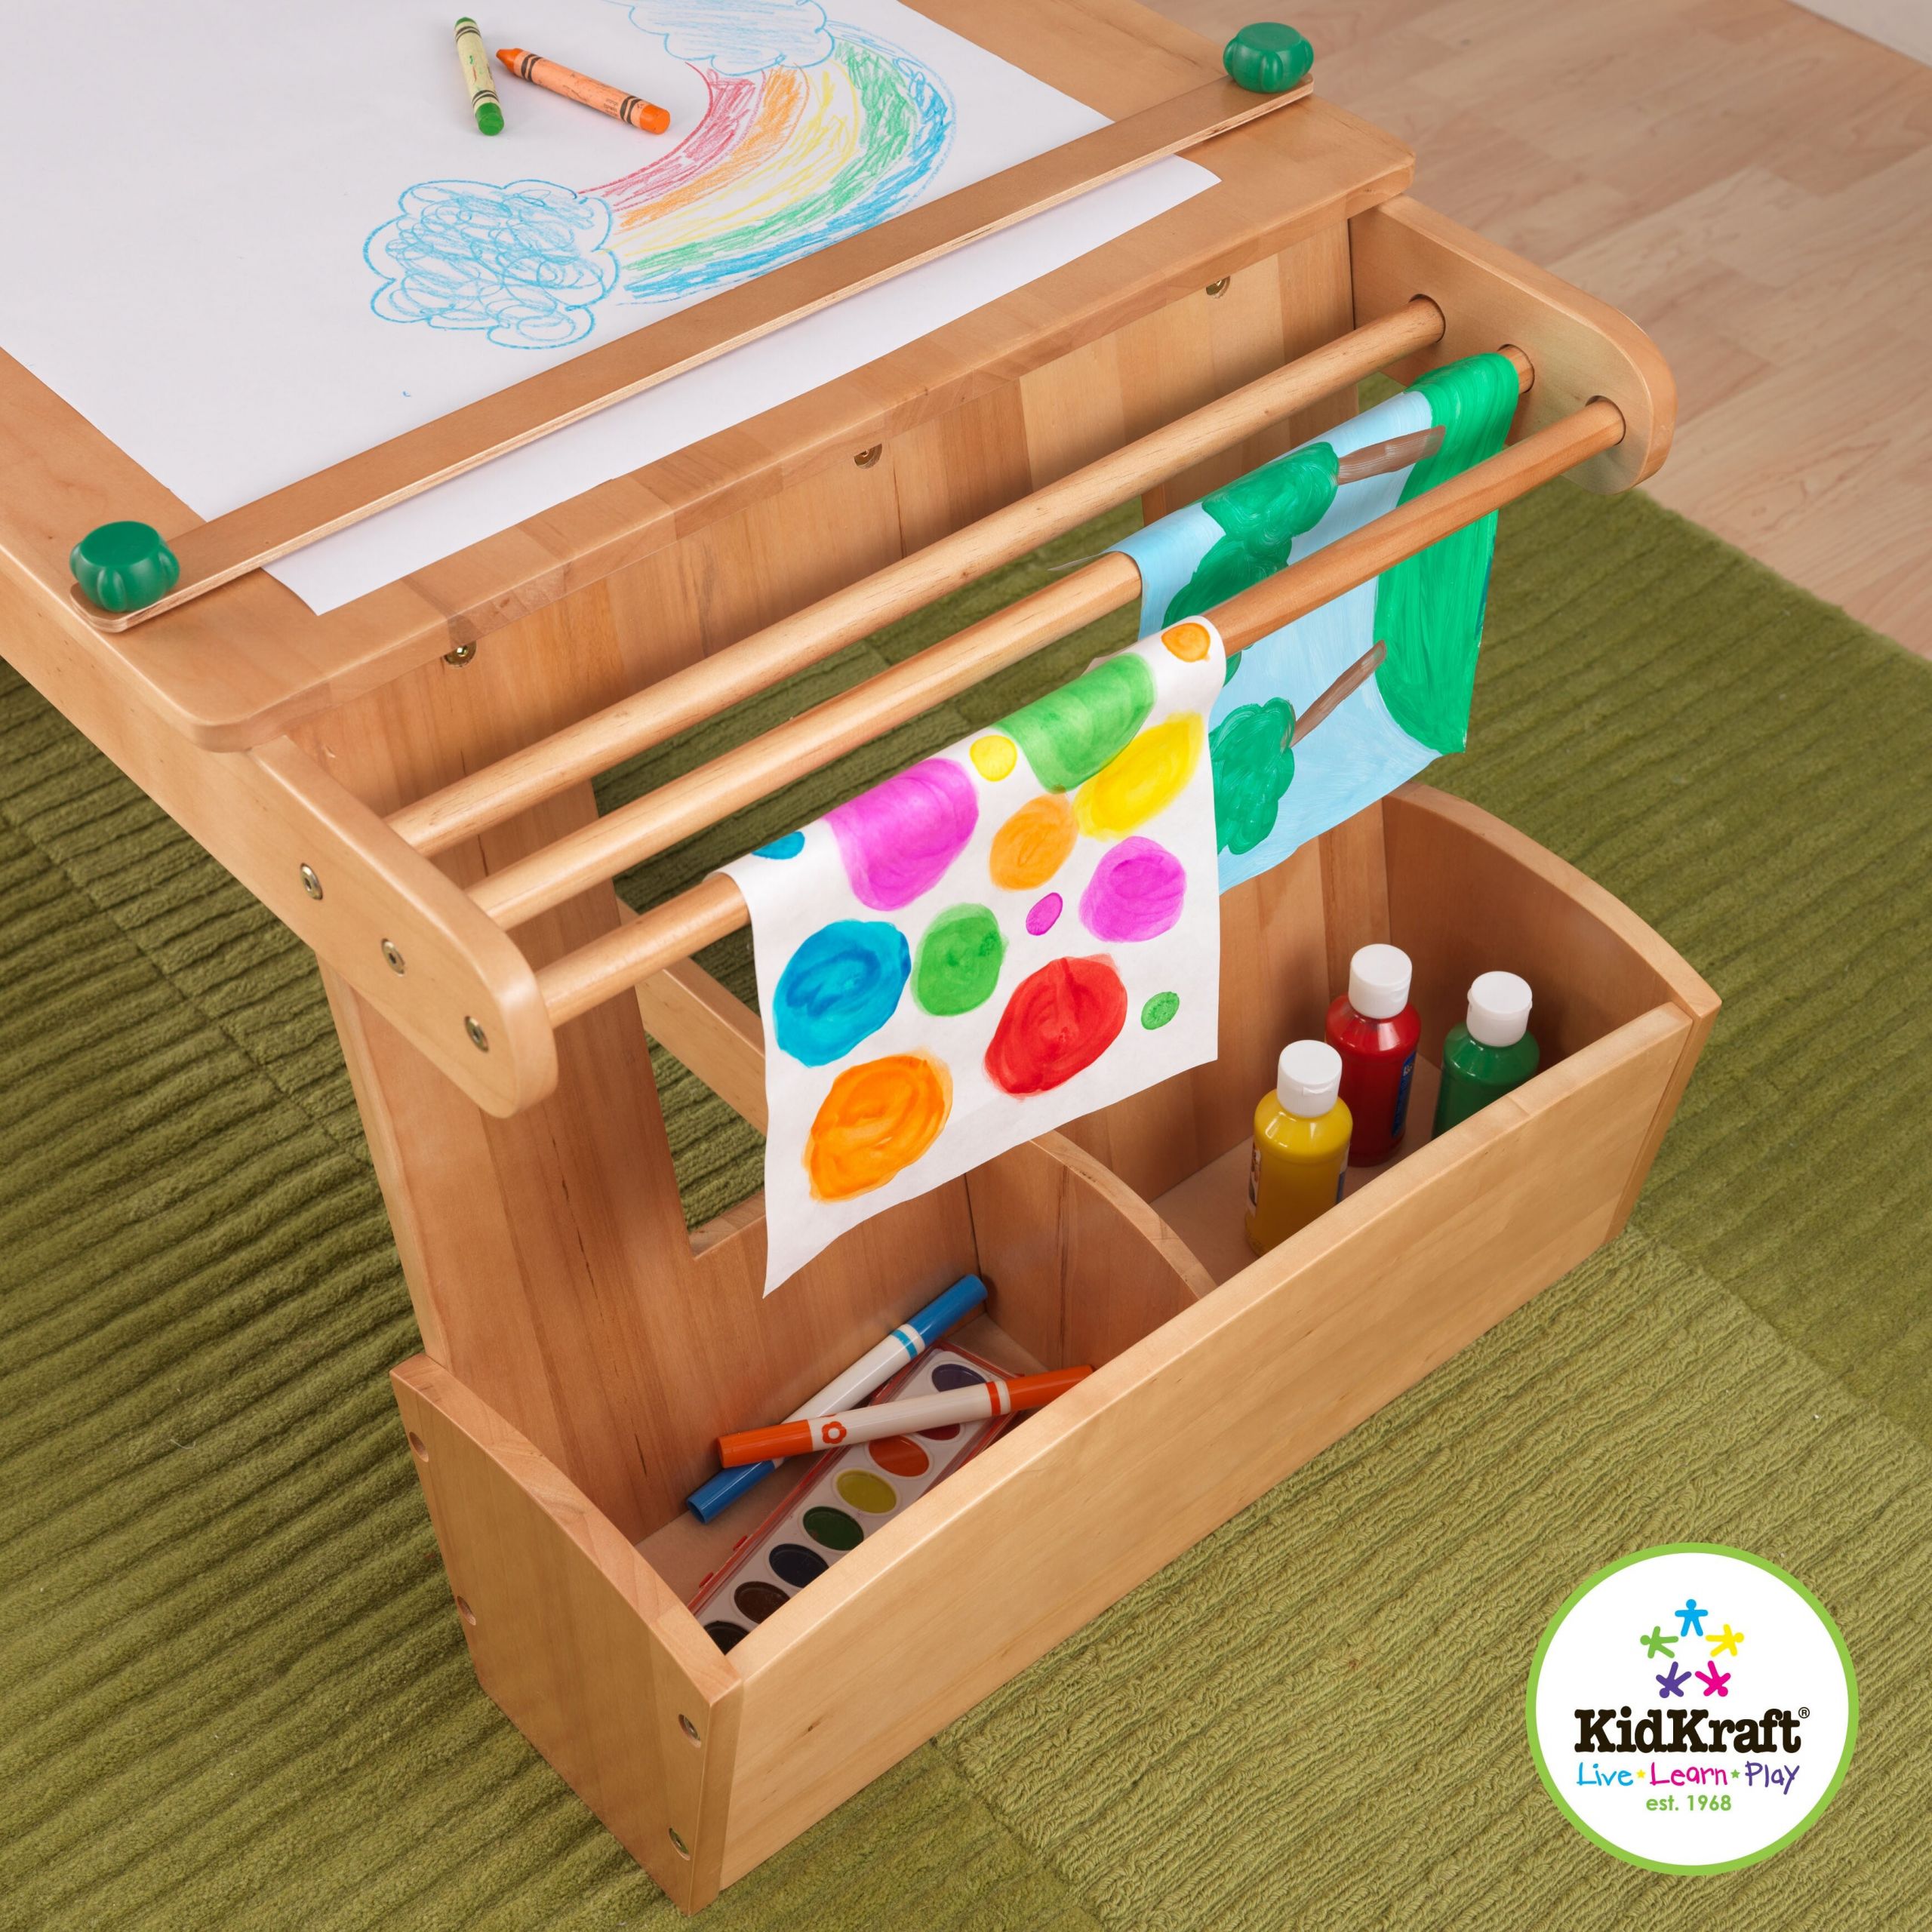 Kids Art And Crafts Table
 KidKraft Drying Rack and Storage Kids Arts and Crafts